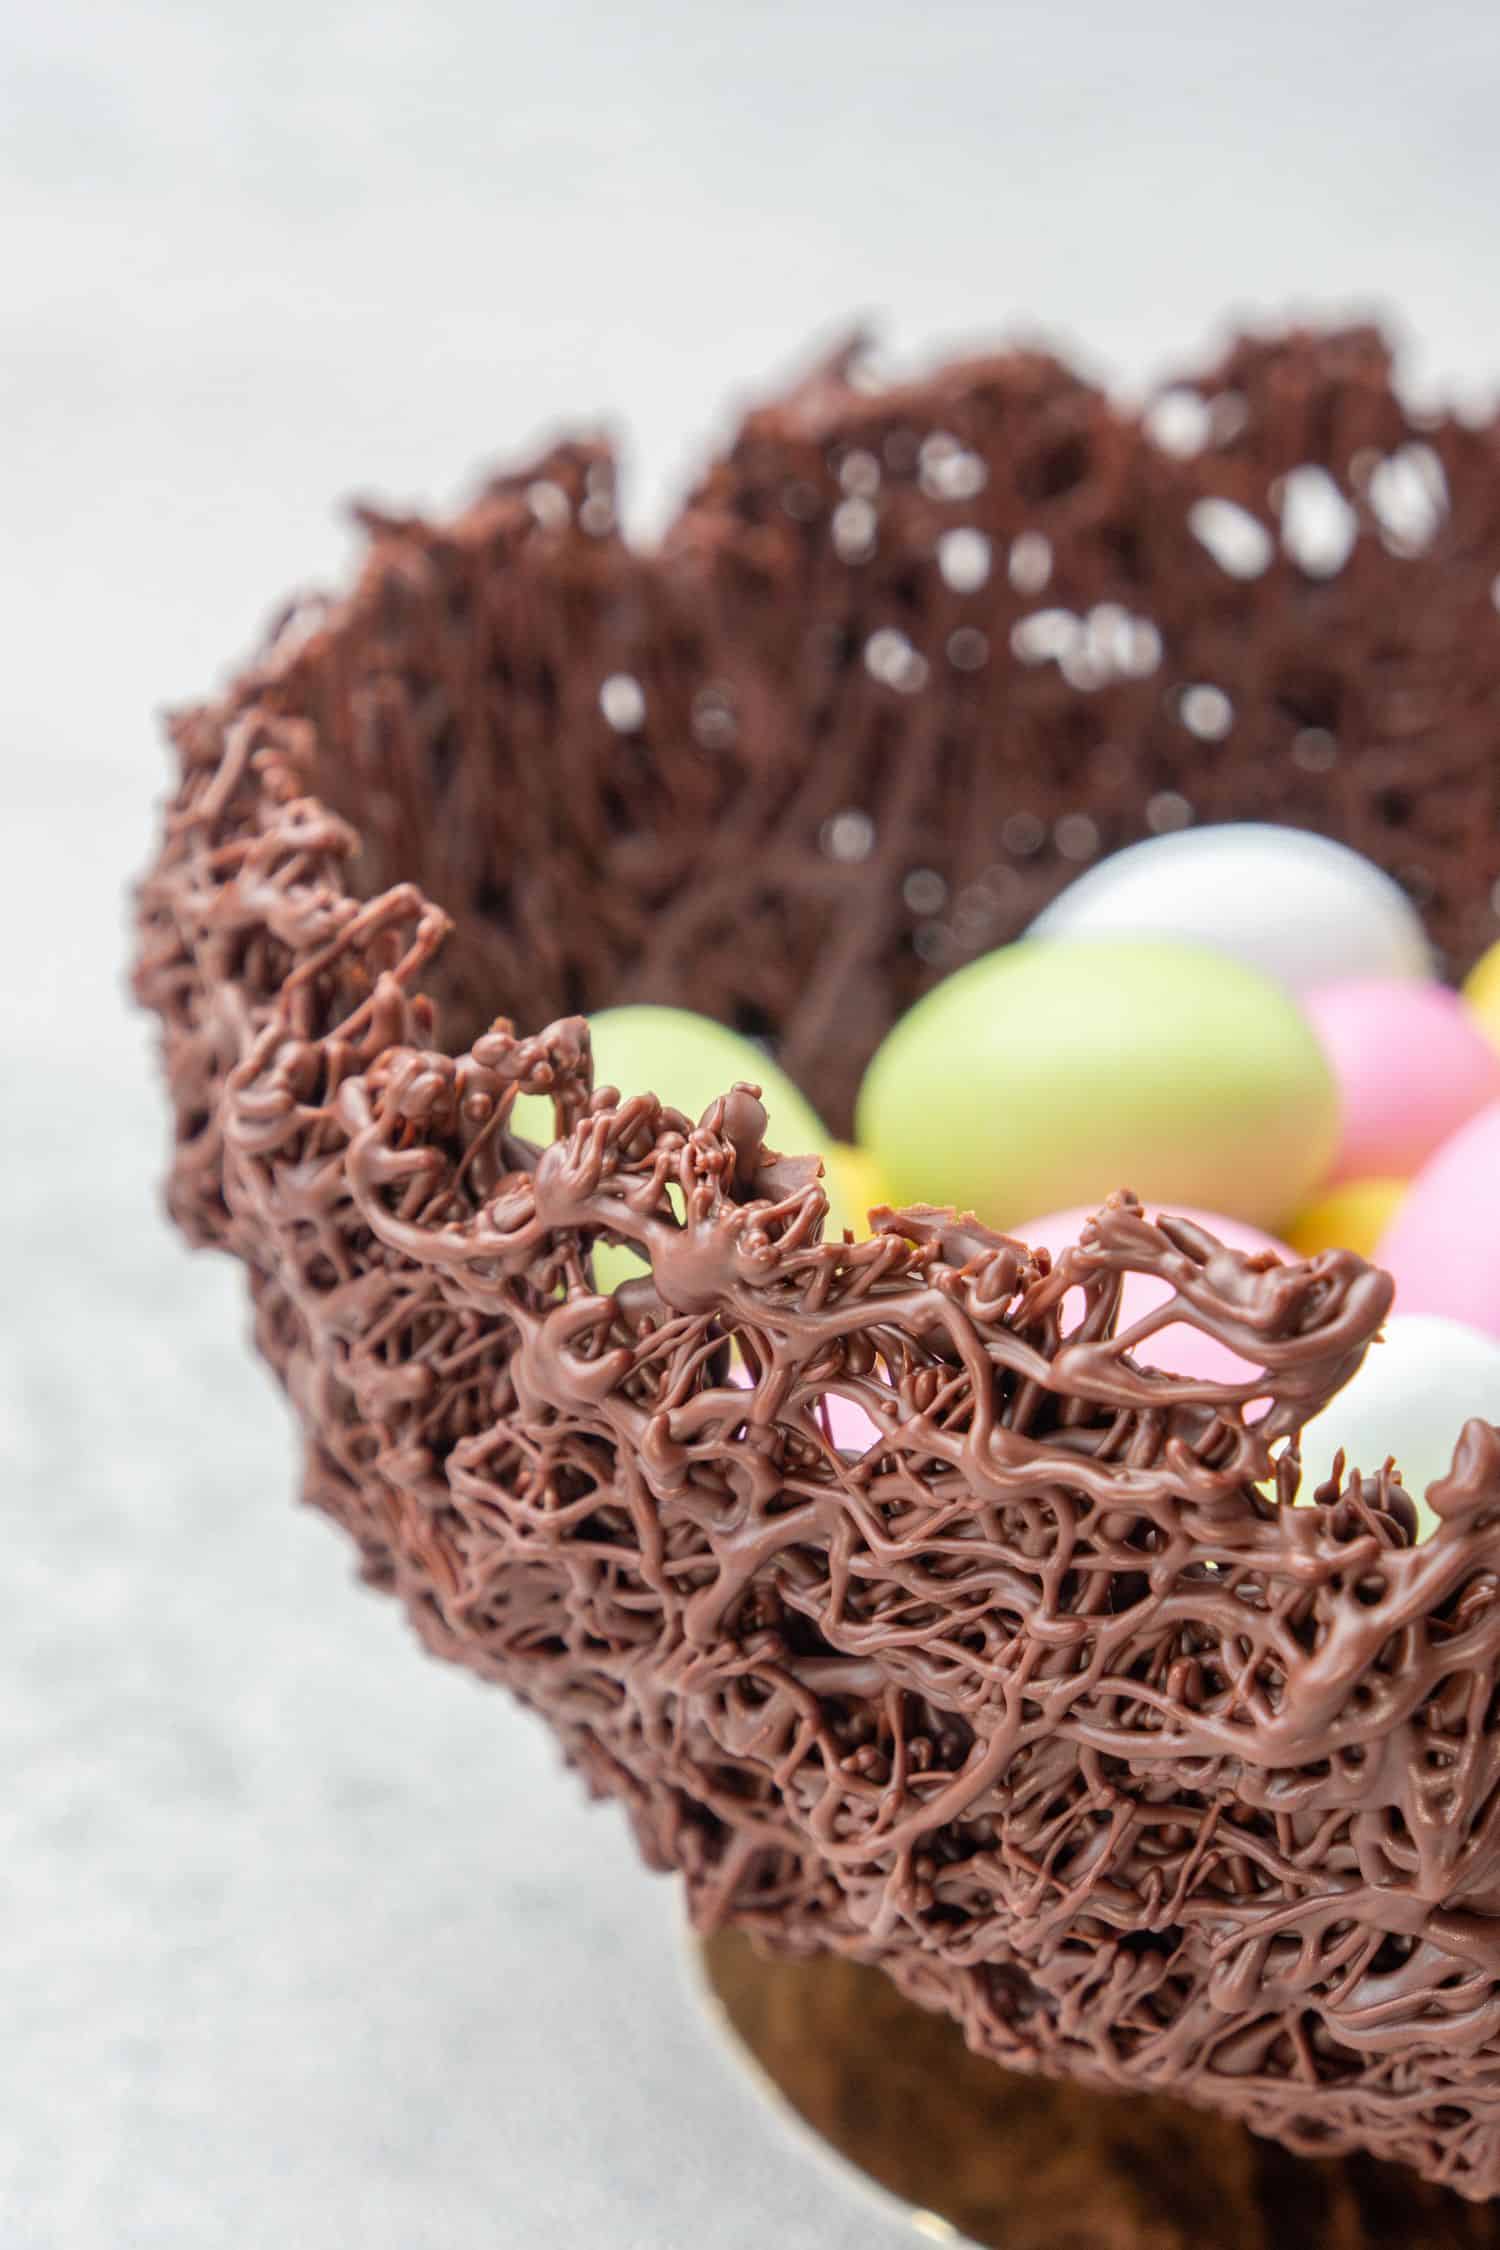 Chocolate nest for Easter